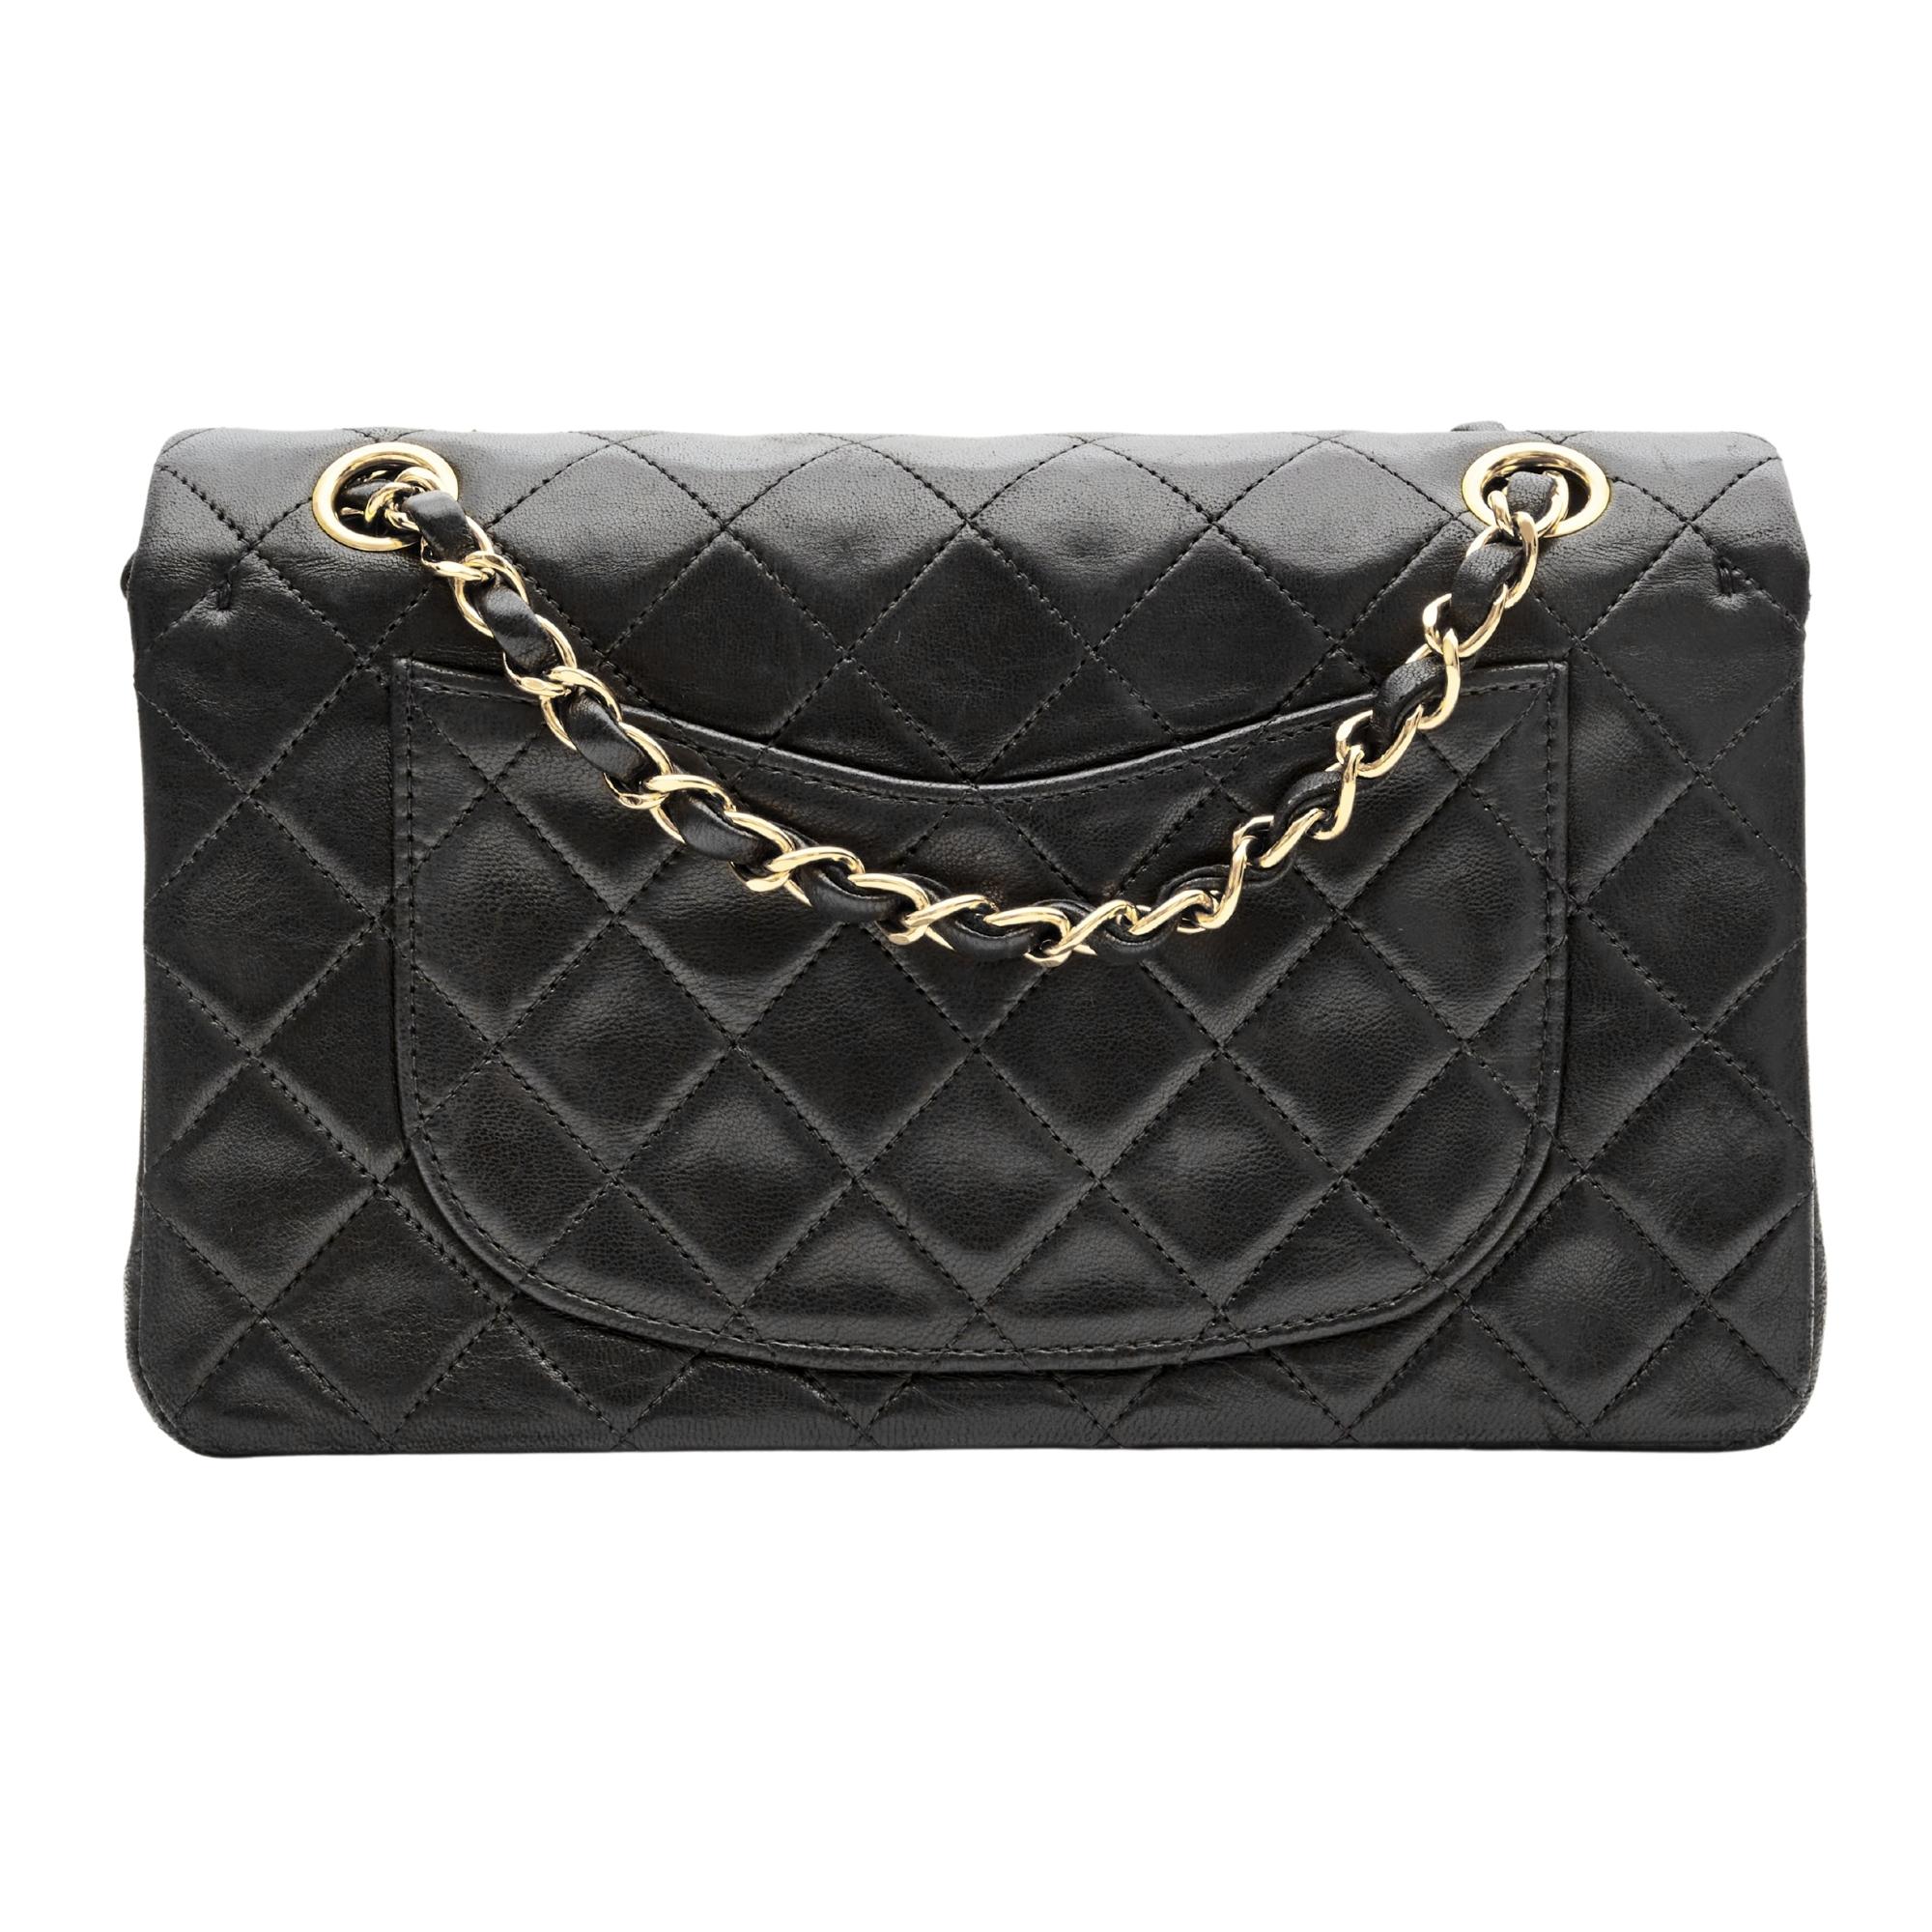 This Chanel bag is made with lambskin leather in black with signature diamond stitching. The bag features gold tone hardware, a front flap with the interlocking CC turn lock closure, a gold toned chain interlaced with leather, a half moon back slip